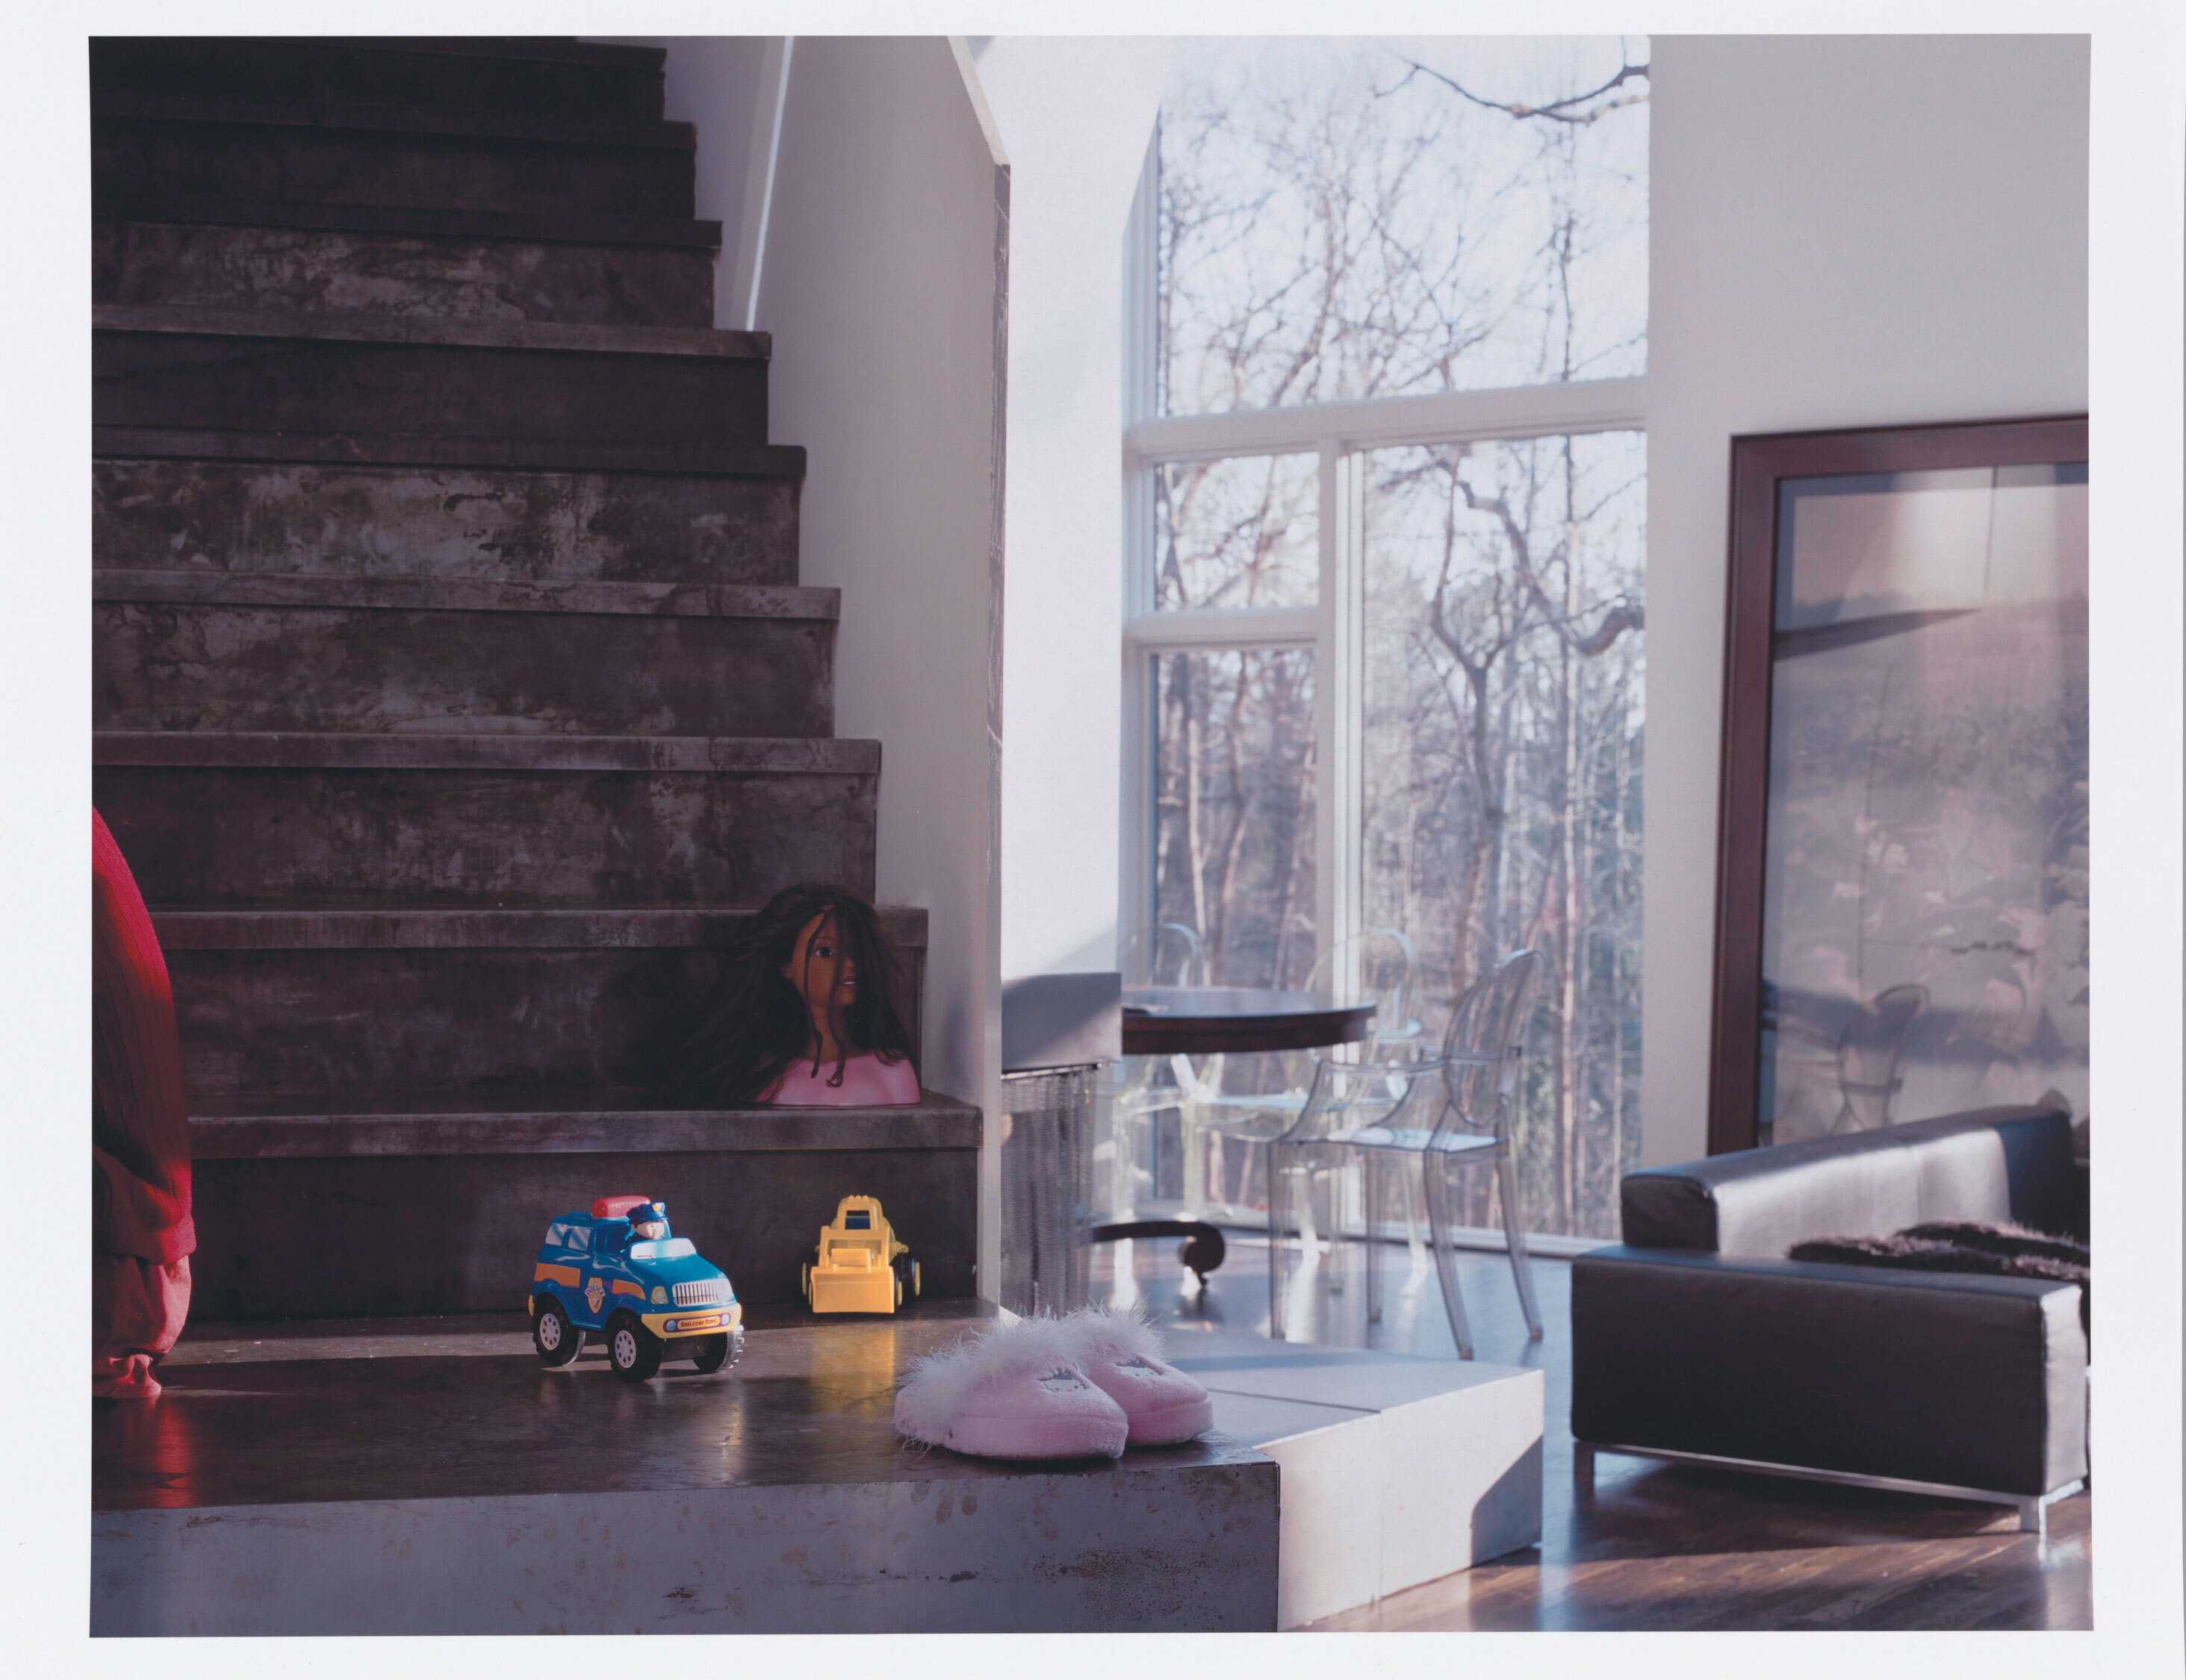 A color photograph of the interior of a modern house. To left is a staircase that leads down to a landing on which there are two (2) child's toy trucks and a pair of pink fuzzy slippers. On the first stair is a doll's head with hair.  To right is the living space of the home, including a leather sofa, a large framed artwork, and a wooden dining table with clear plastic chairs. Behind the table are large pane glass windows with an expanse of leafless trees visible through the windows.